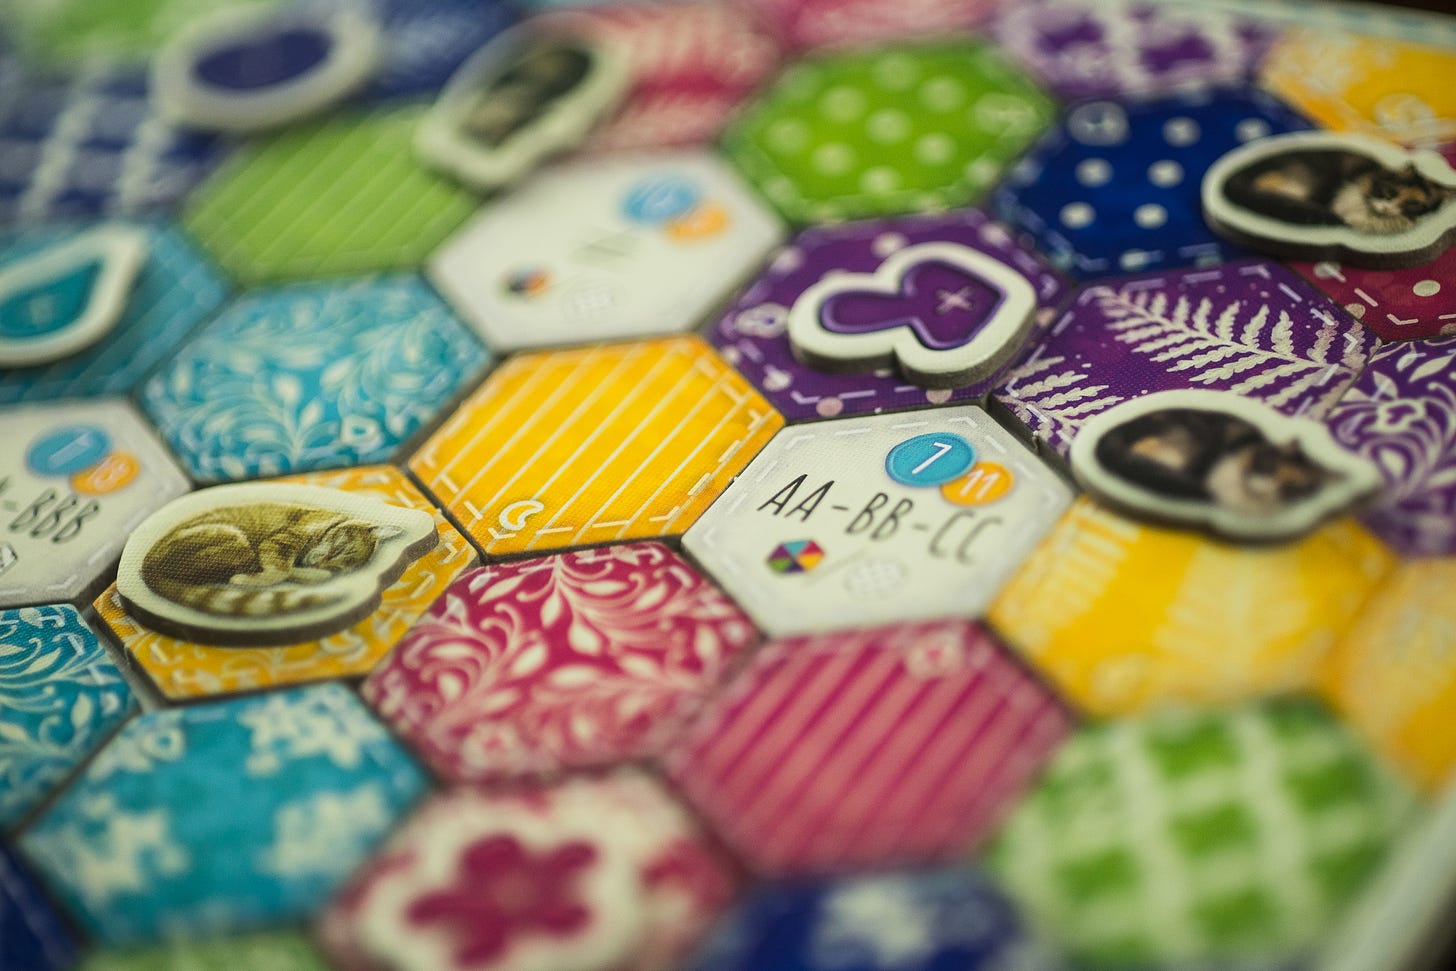 Tiles from the board game Calico placed. There are cat and button tokens on top of the quilt tiles.